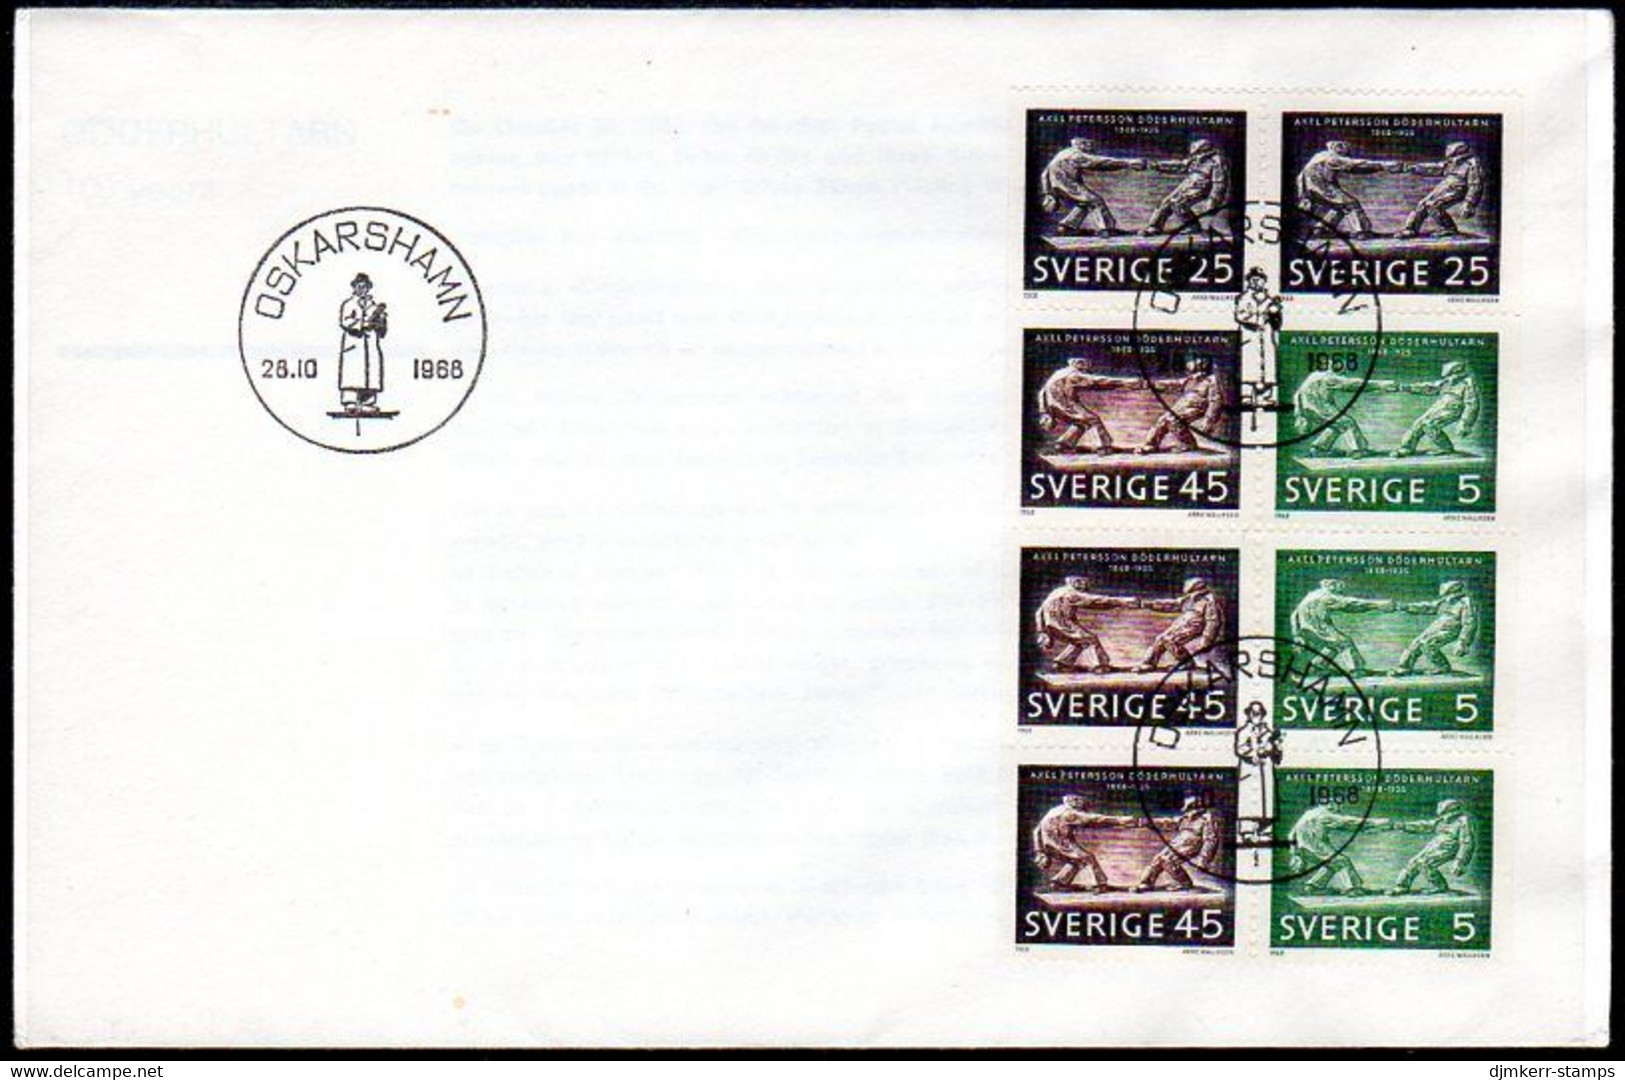 SWEDEN 1968 Axel Petersson Centenary FDC.  Michel 618-20 - FDC